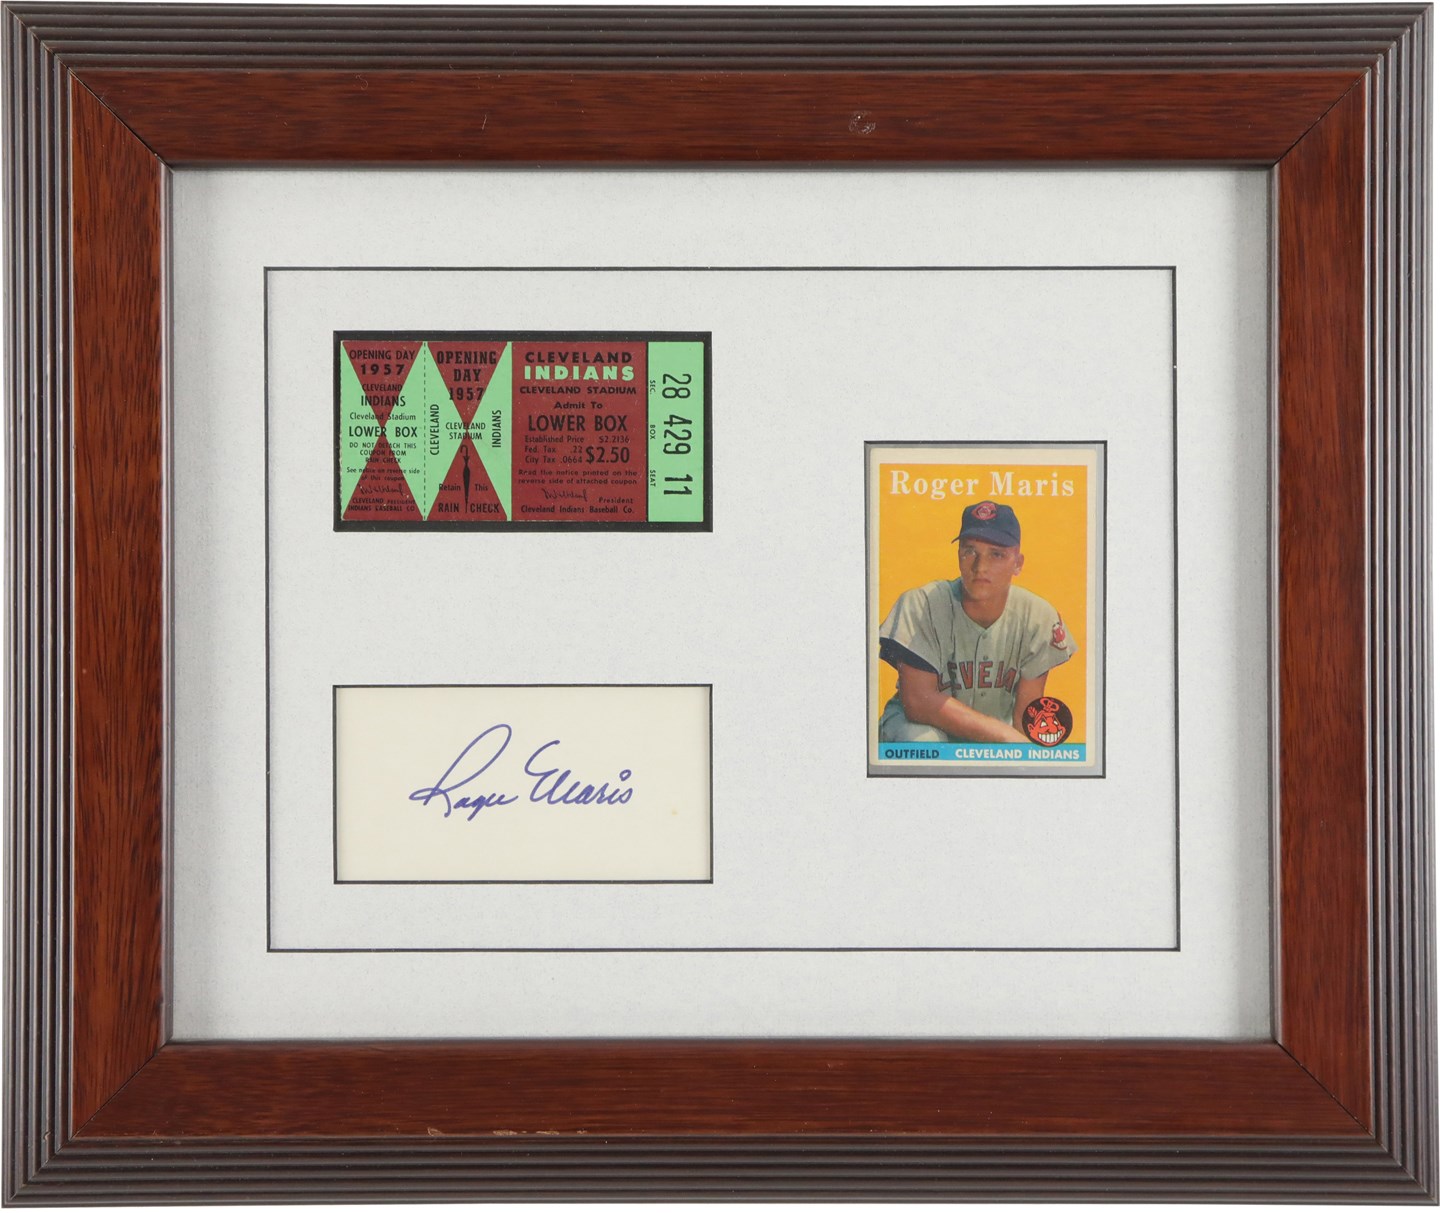 Mantle and Maris - Roger Maris MLB Debut Ticket Stub with 1958 Topps Rookie Card and Autograph Display